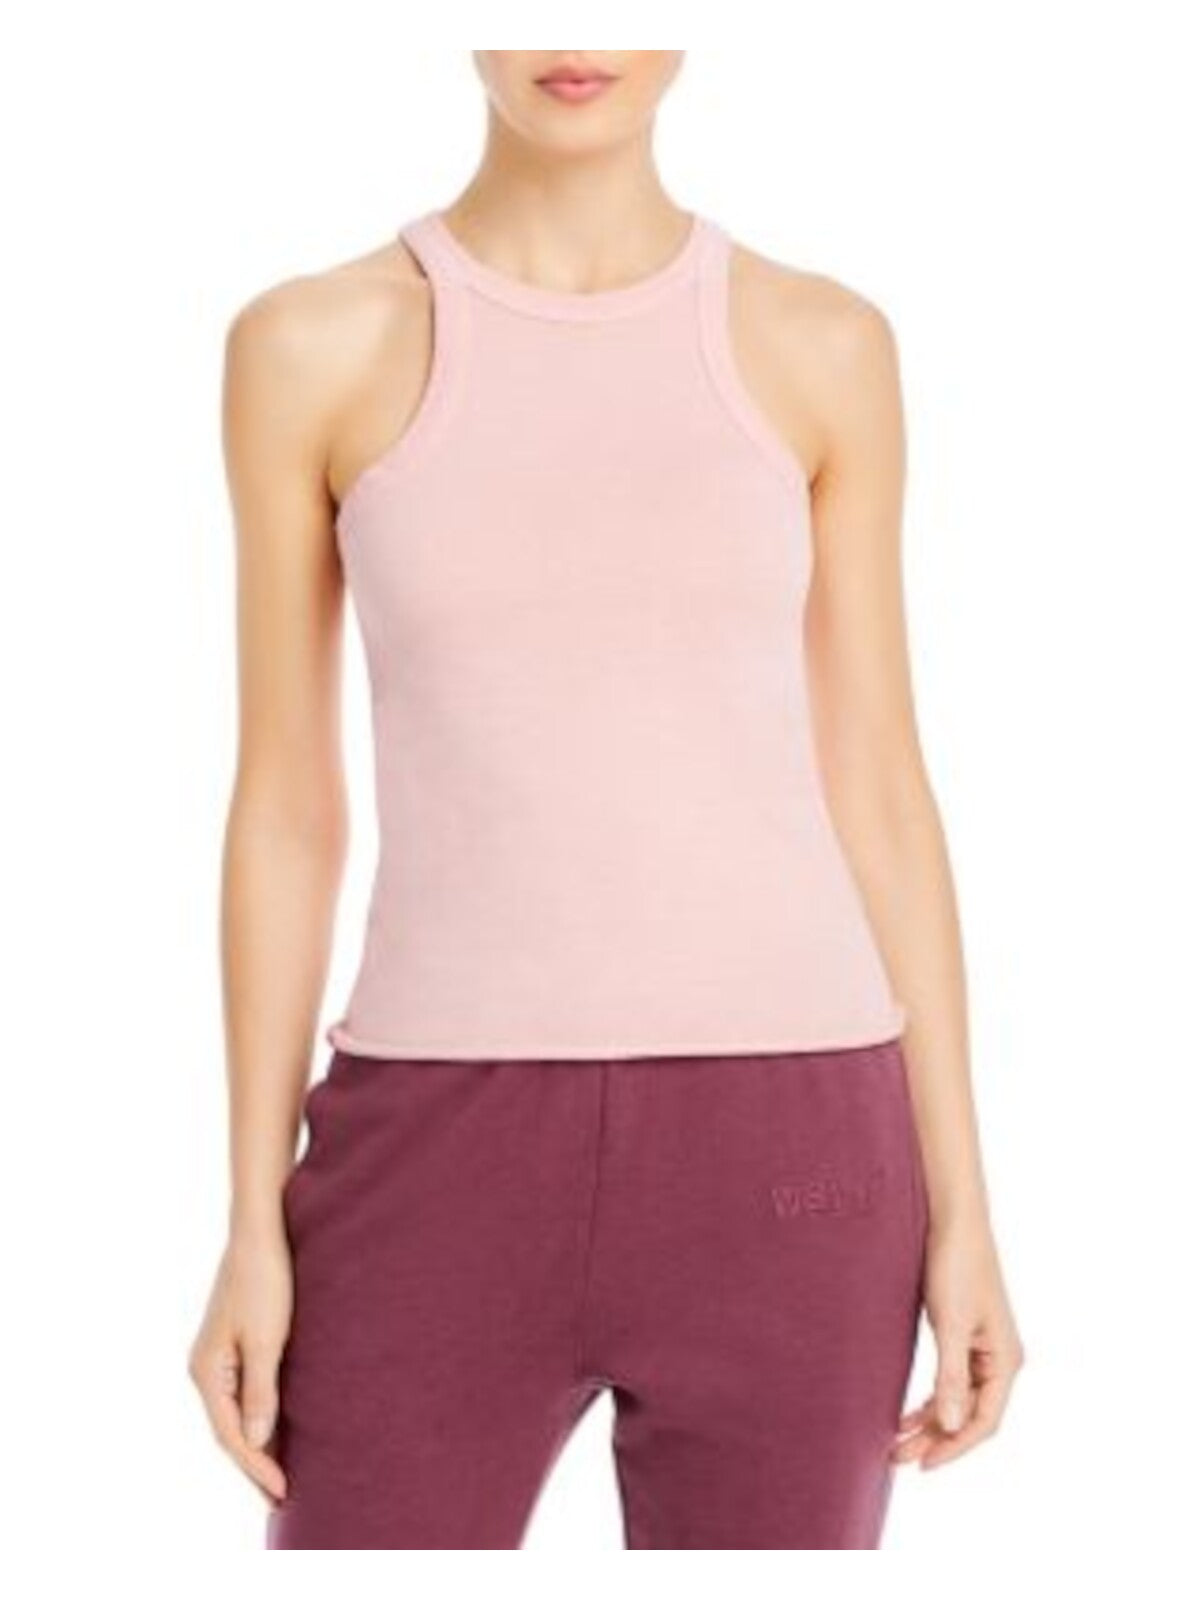 WSLY Womens Pink Ribbed Sleeveless Crew Neck Tank Top M